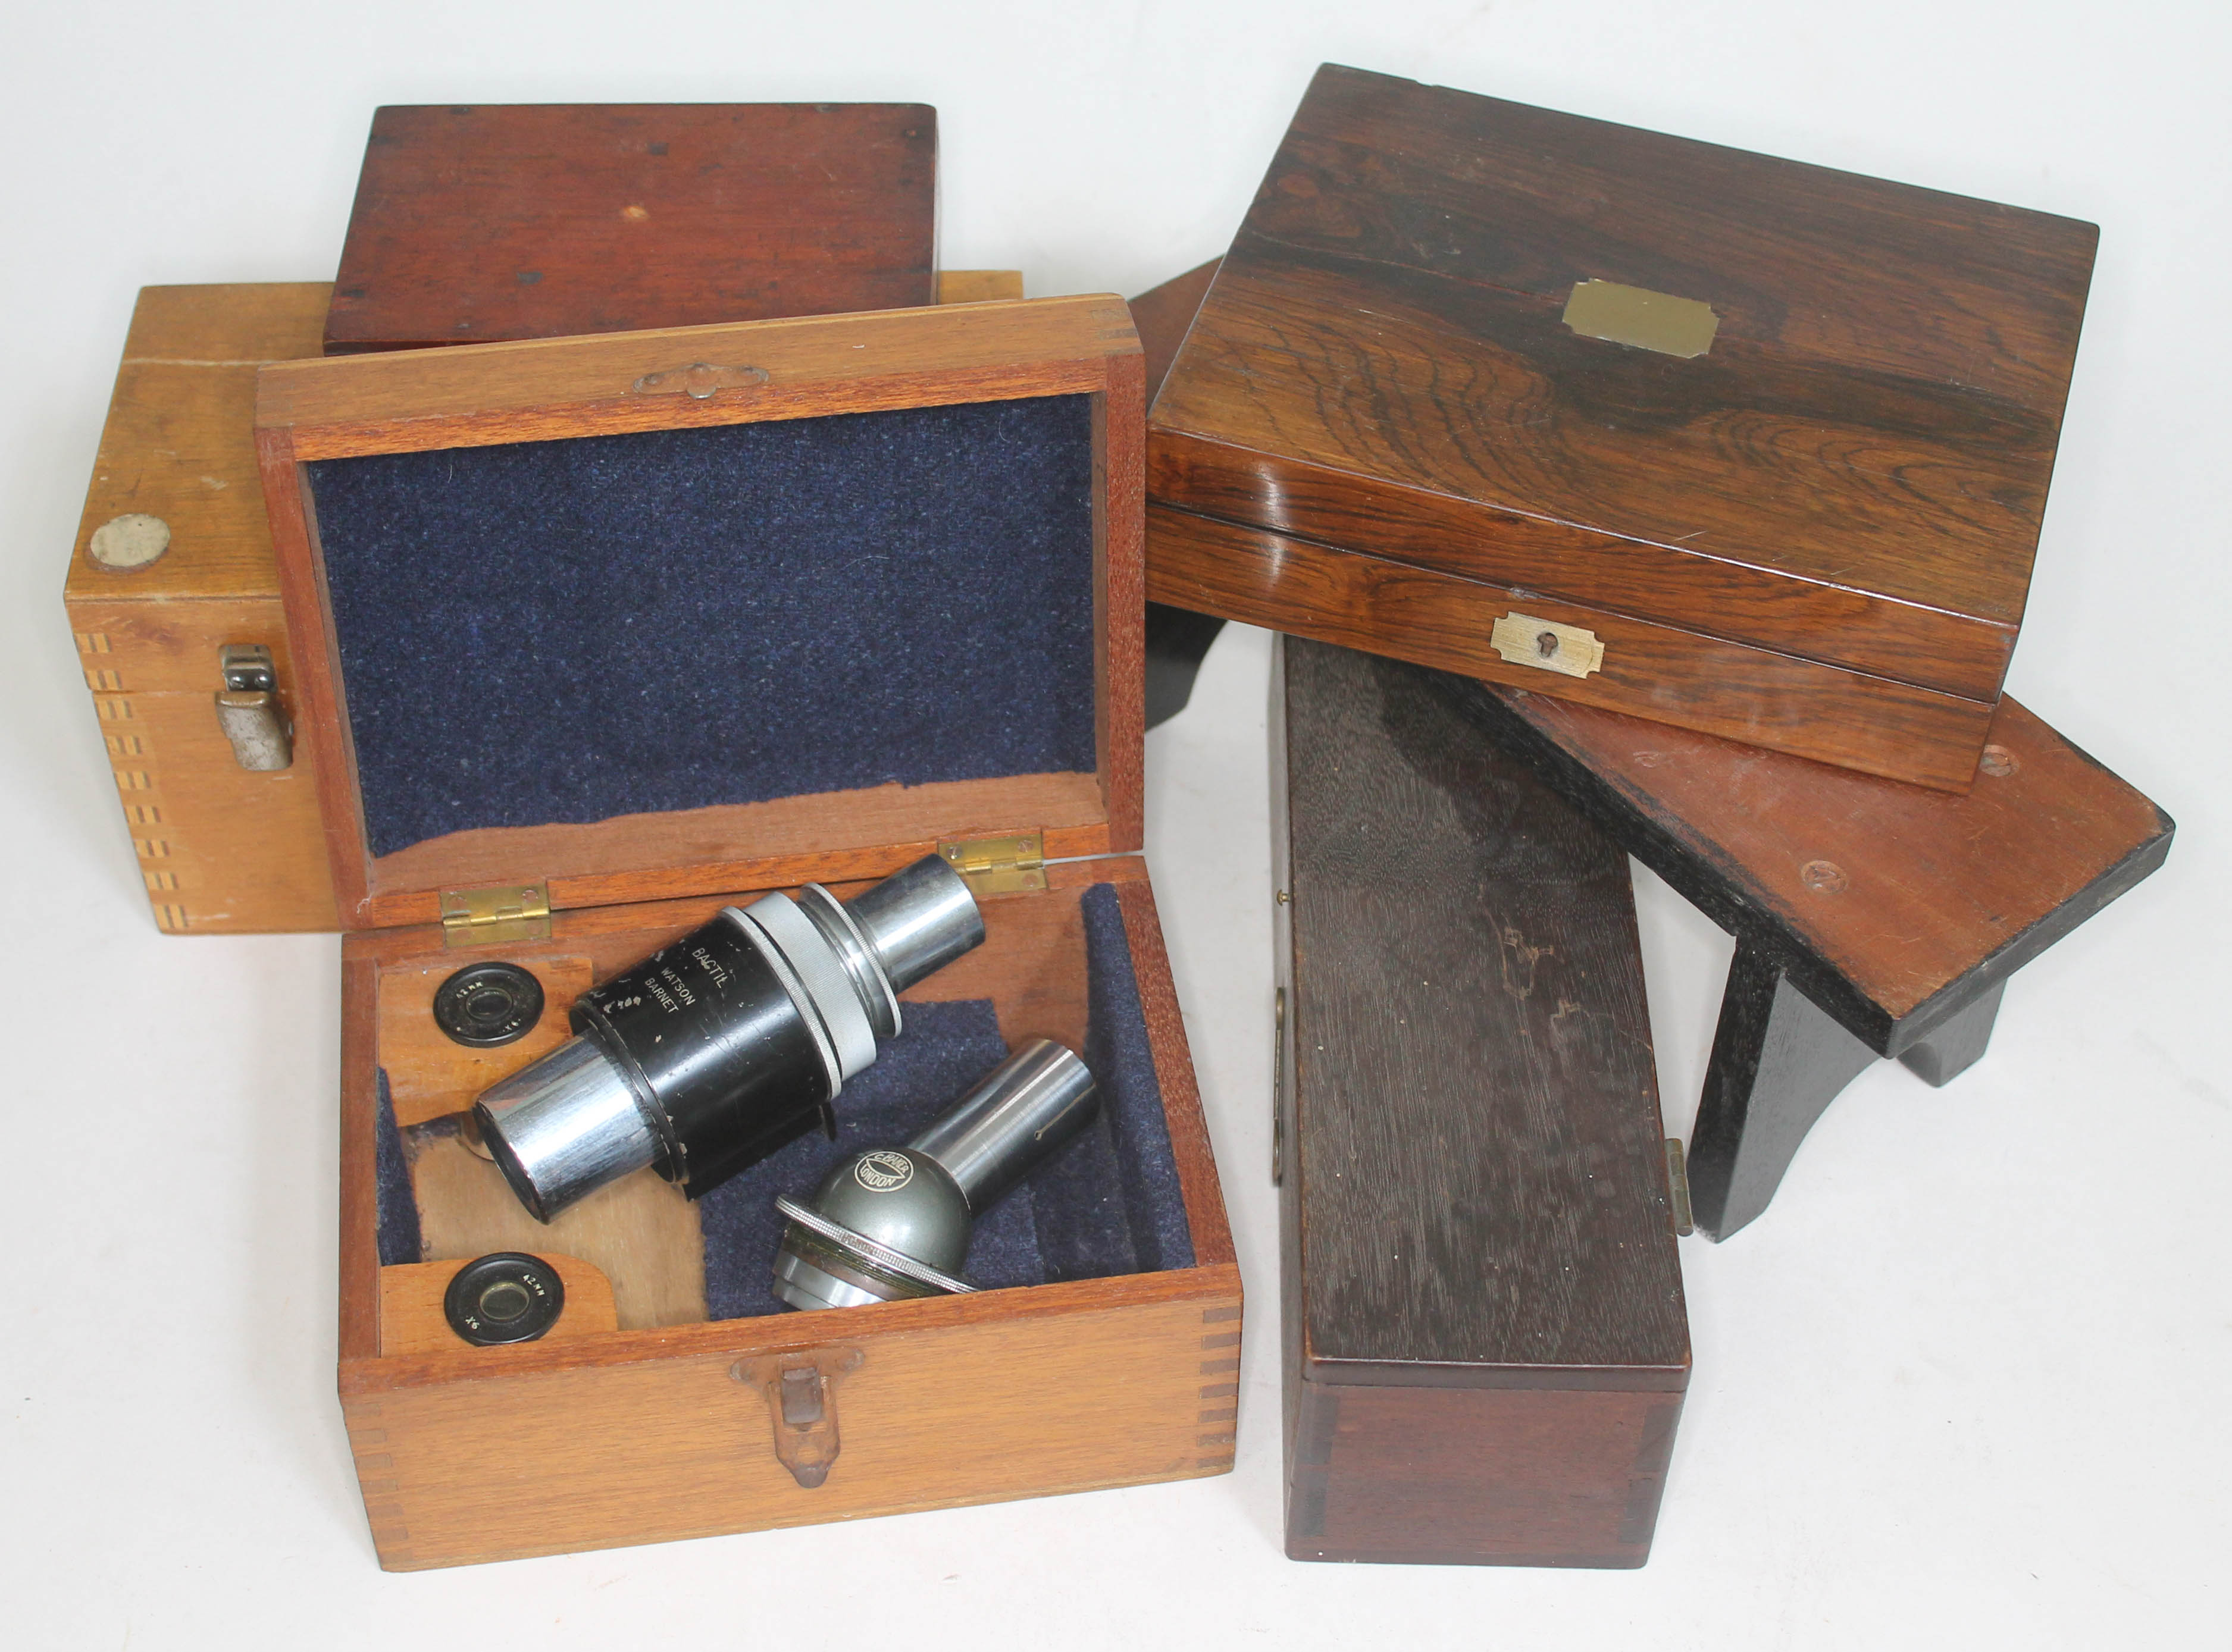 Two microscope lenses together with various empty instrument boxes.